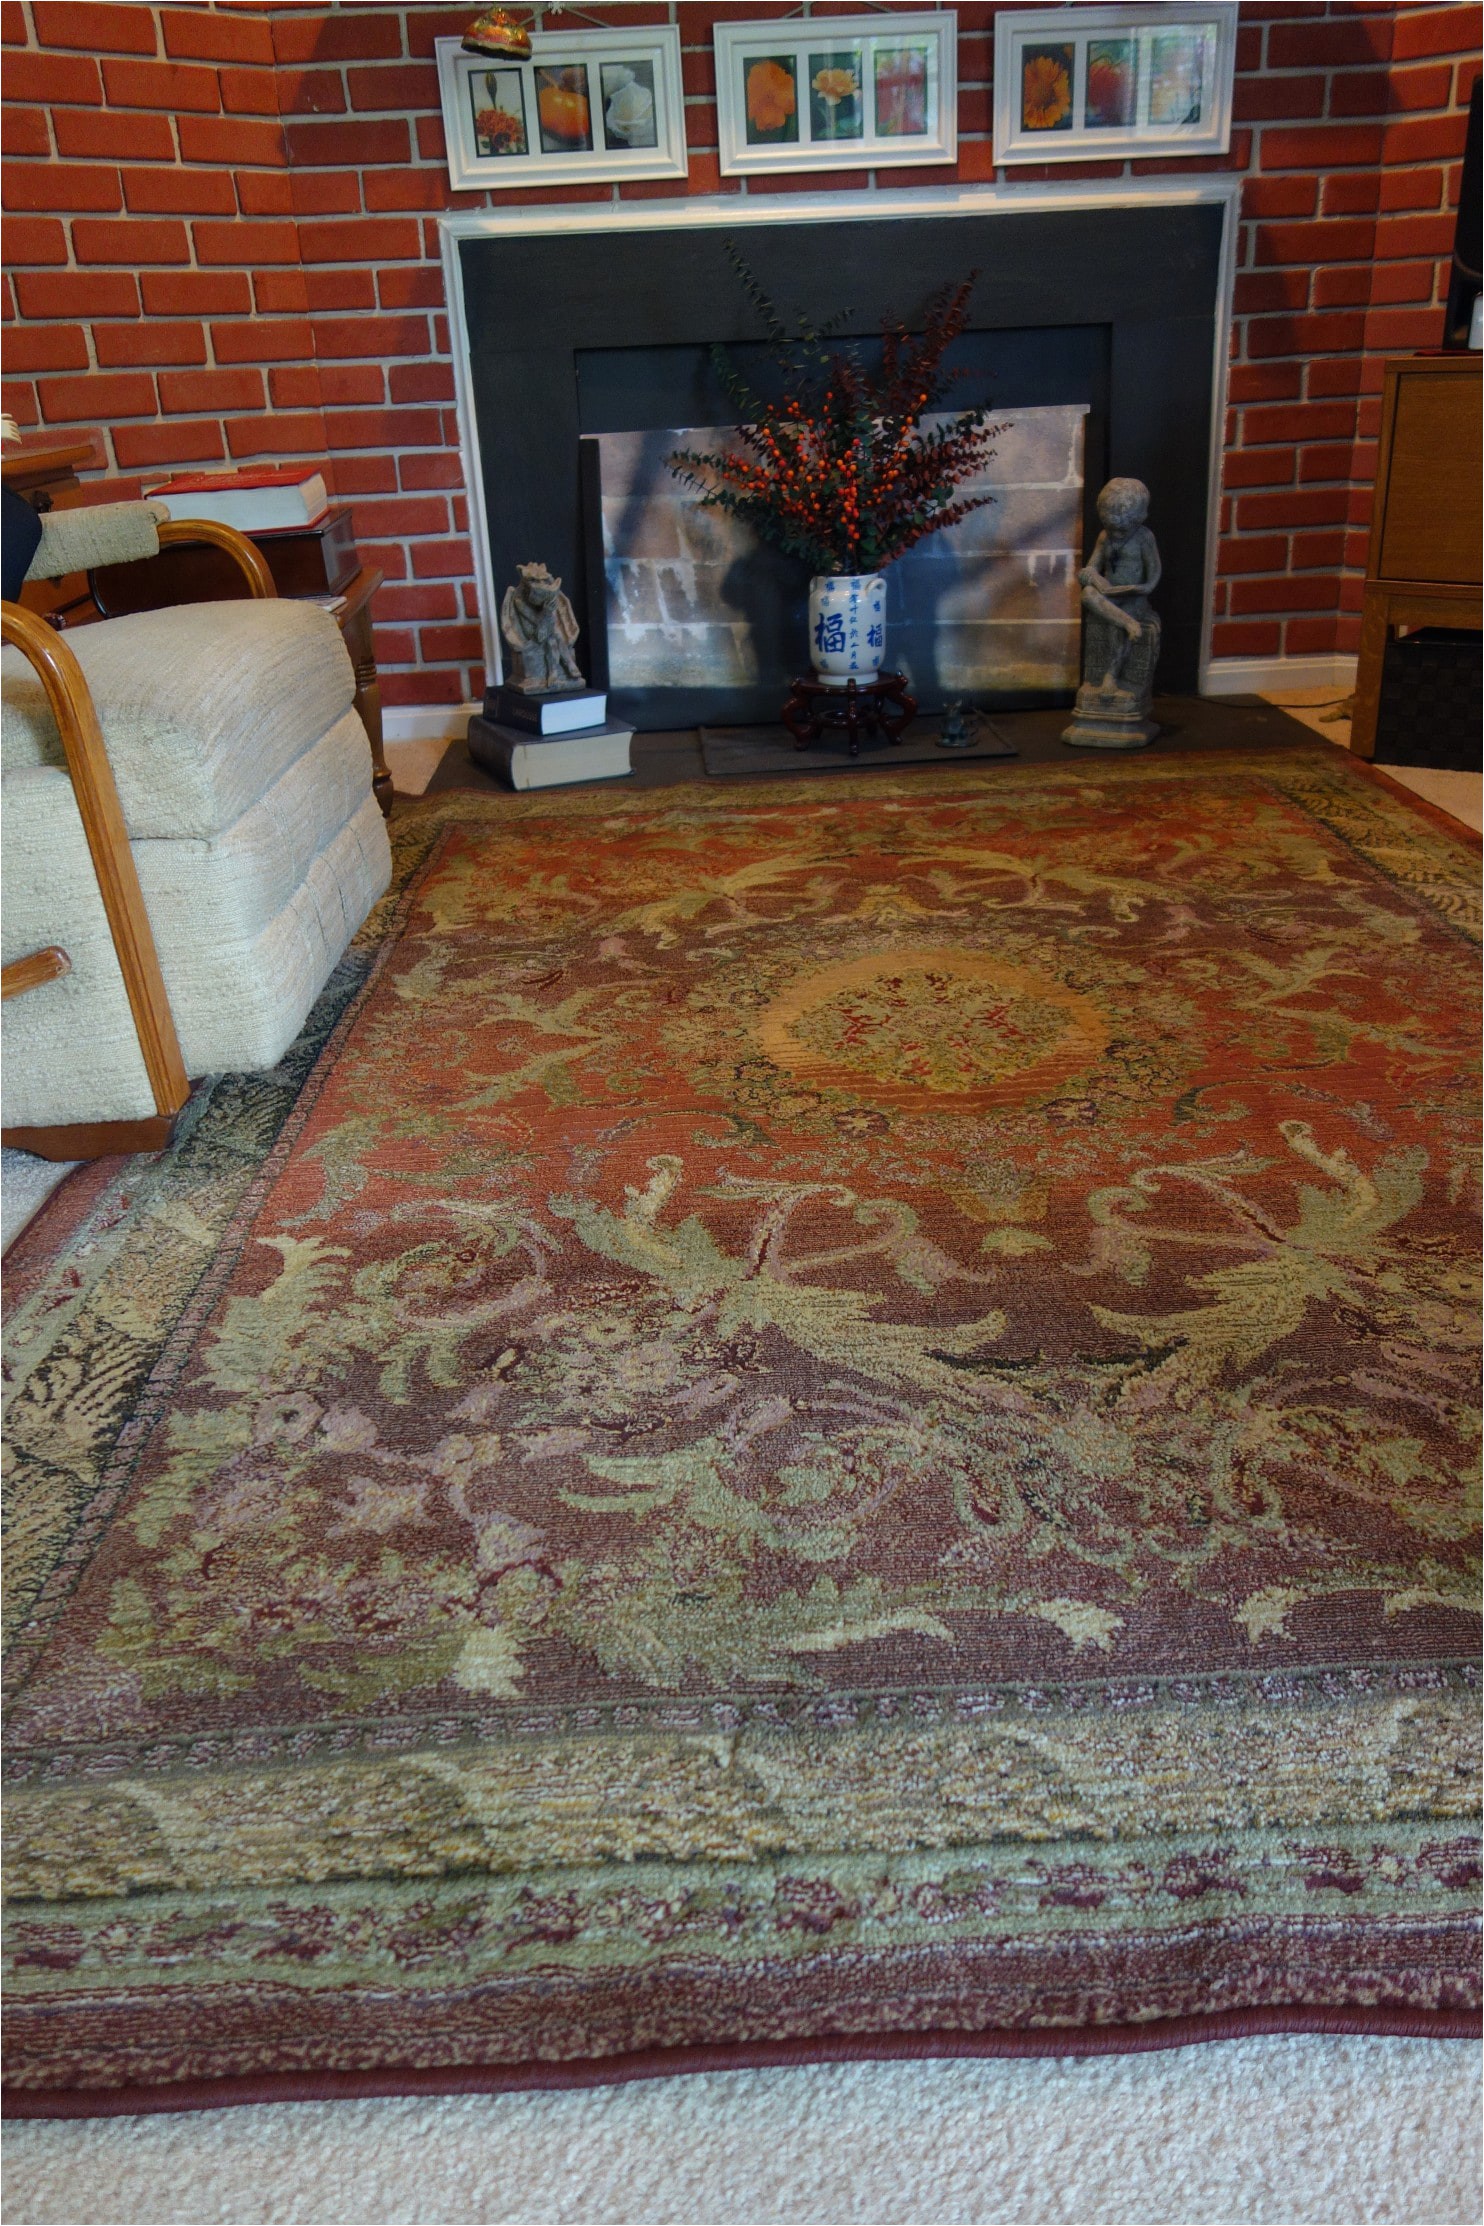 Placing area Rugs On Carpet How to Keep An area Rug From Creeping On A Carpeted Floor